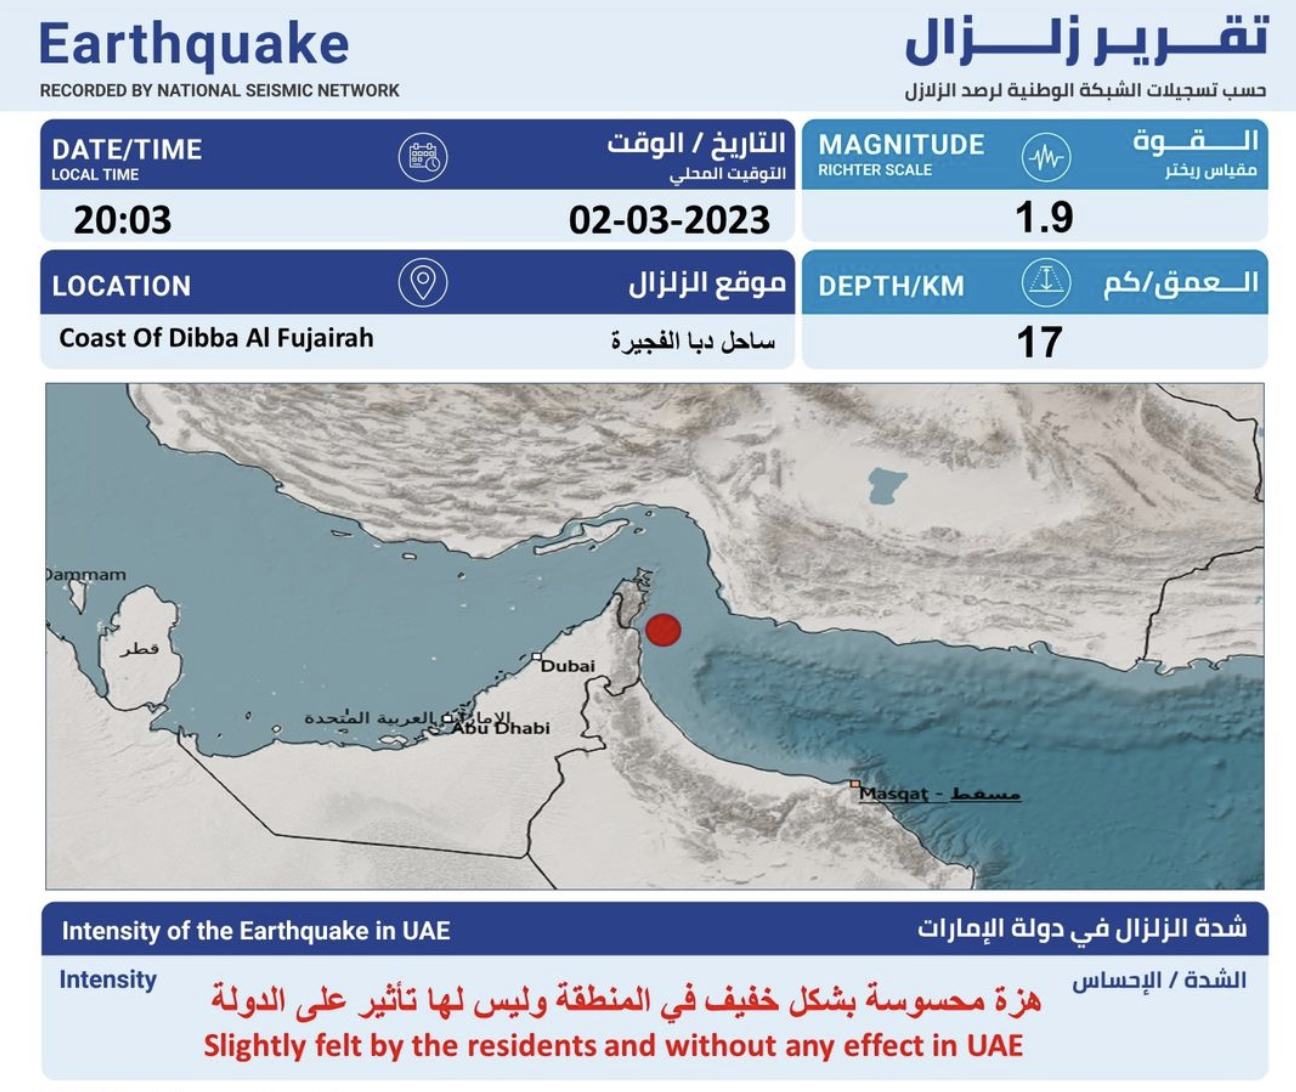 A 1.9 magnitude micro-earthquake was recorded off the coast of Dibba, Fujairah on Thursday evening, according to the UAE's NCM National Seismic Network. (Scree